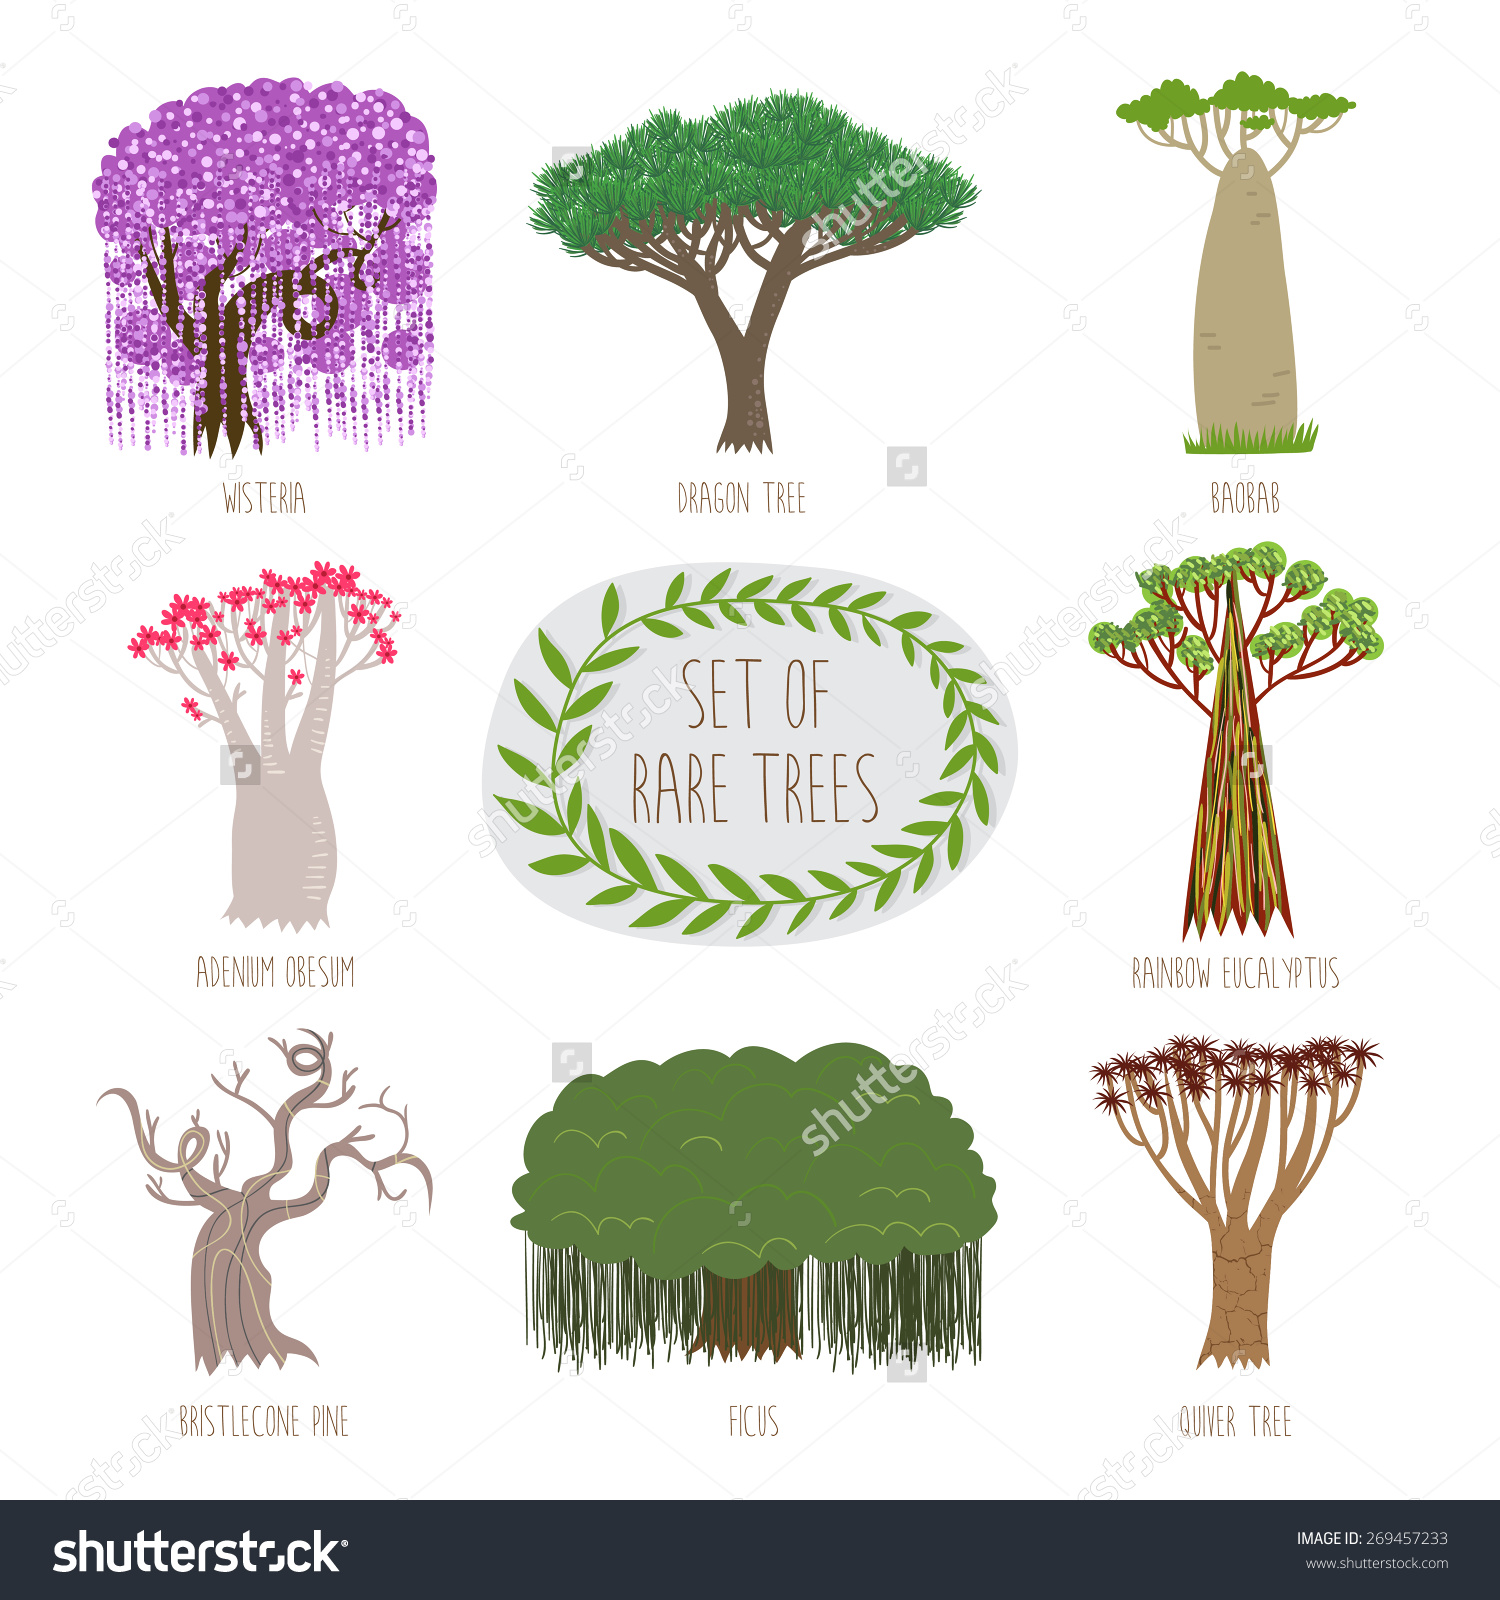 Quiver Tree clipart #1, Download drawings